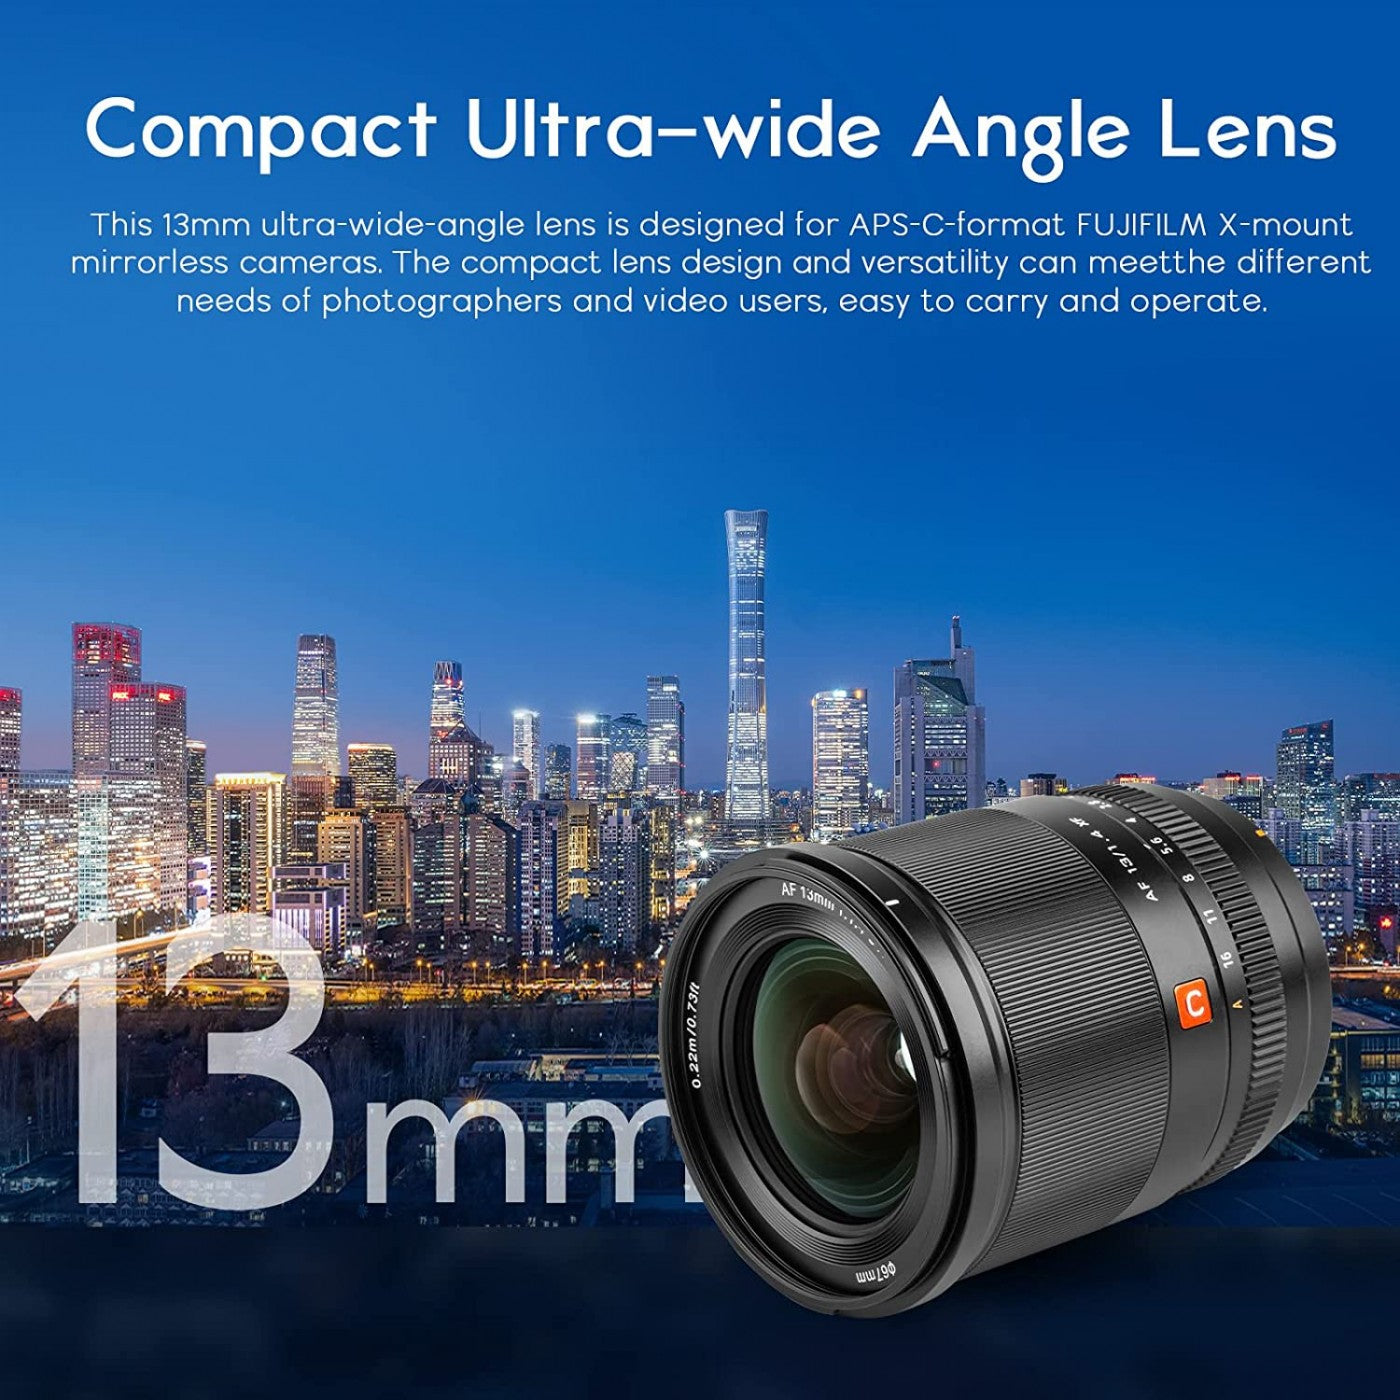 Additional information of the lens on a lifestyle shot of a city scape